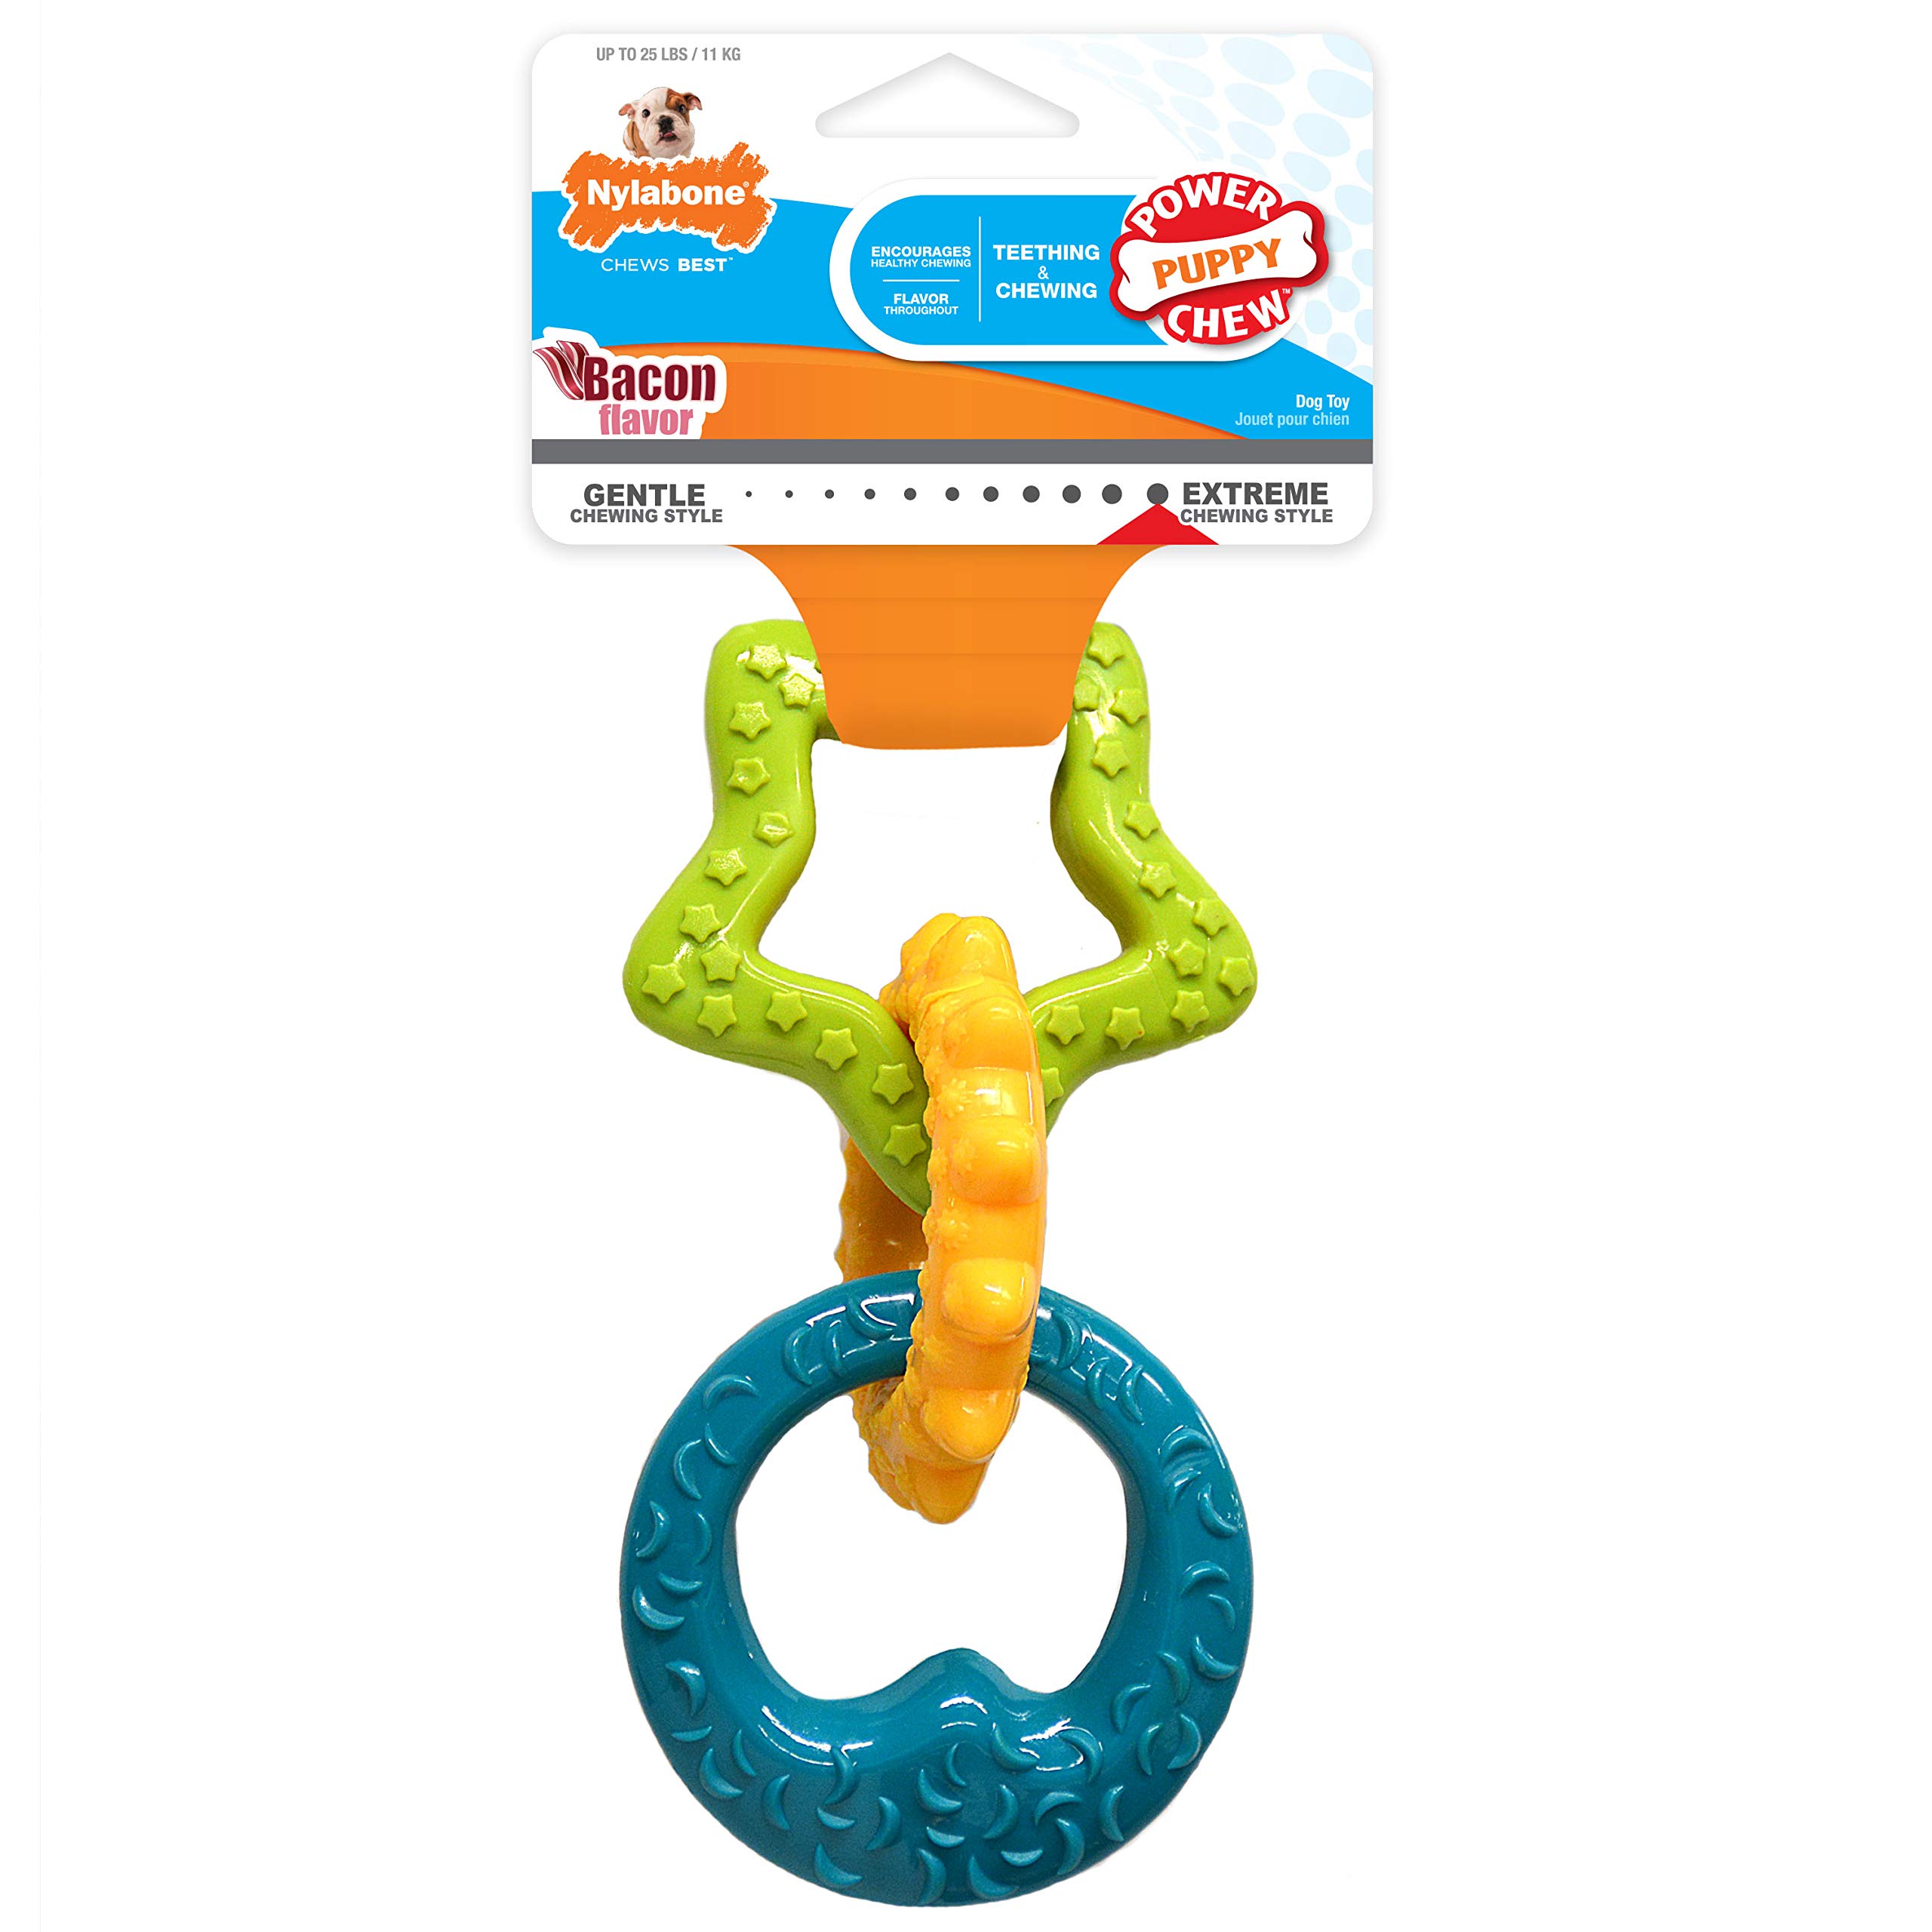 Book Cover Nylabone Puppy Power Rings Chew Toy - Tough and Durable Puppy Chew Toy for Teething - Puppy Supplies - Bacon Flavor, Small (1 Count) Rings Small up to 25 lbs.